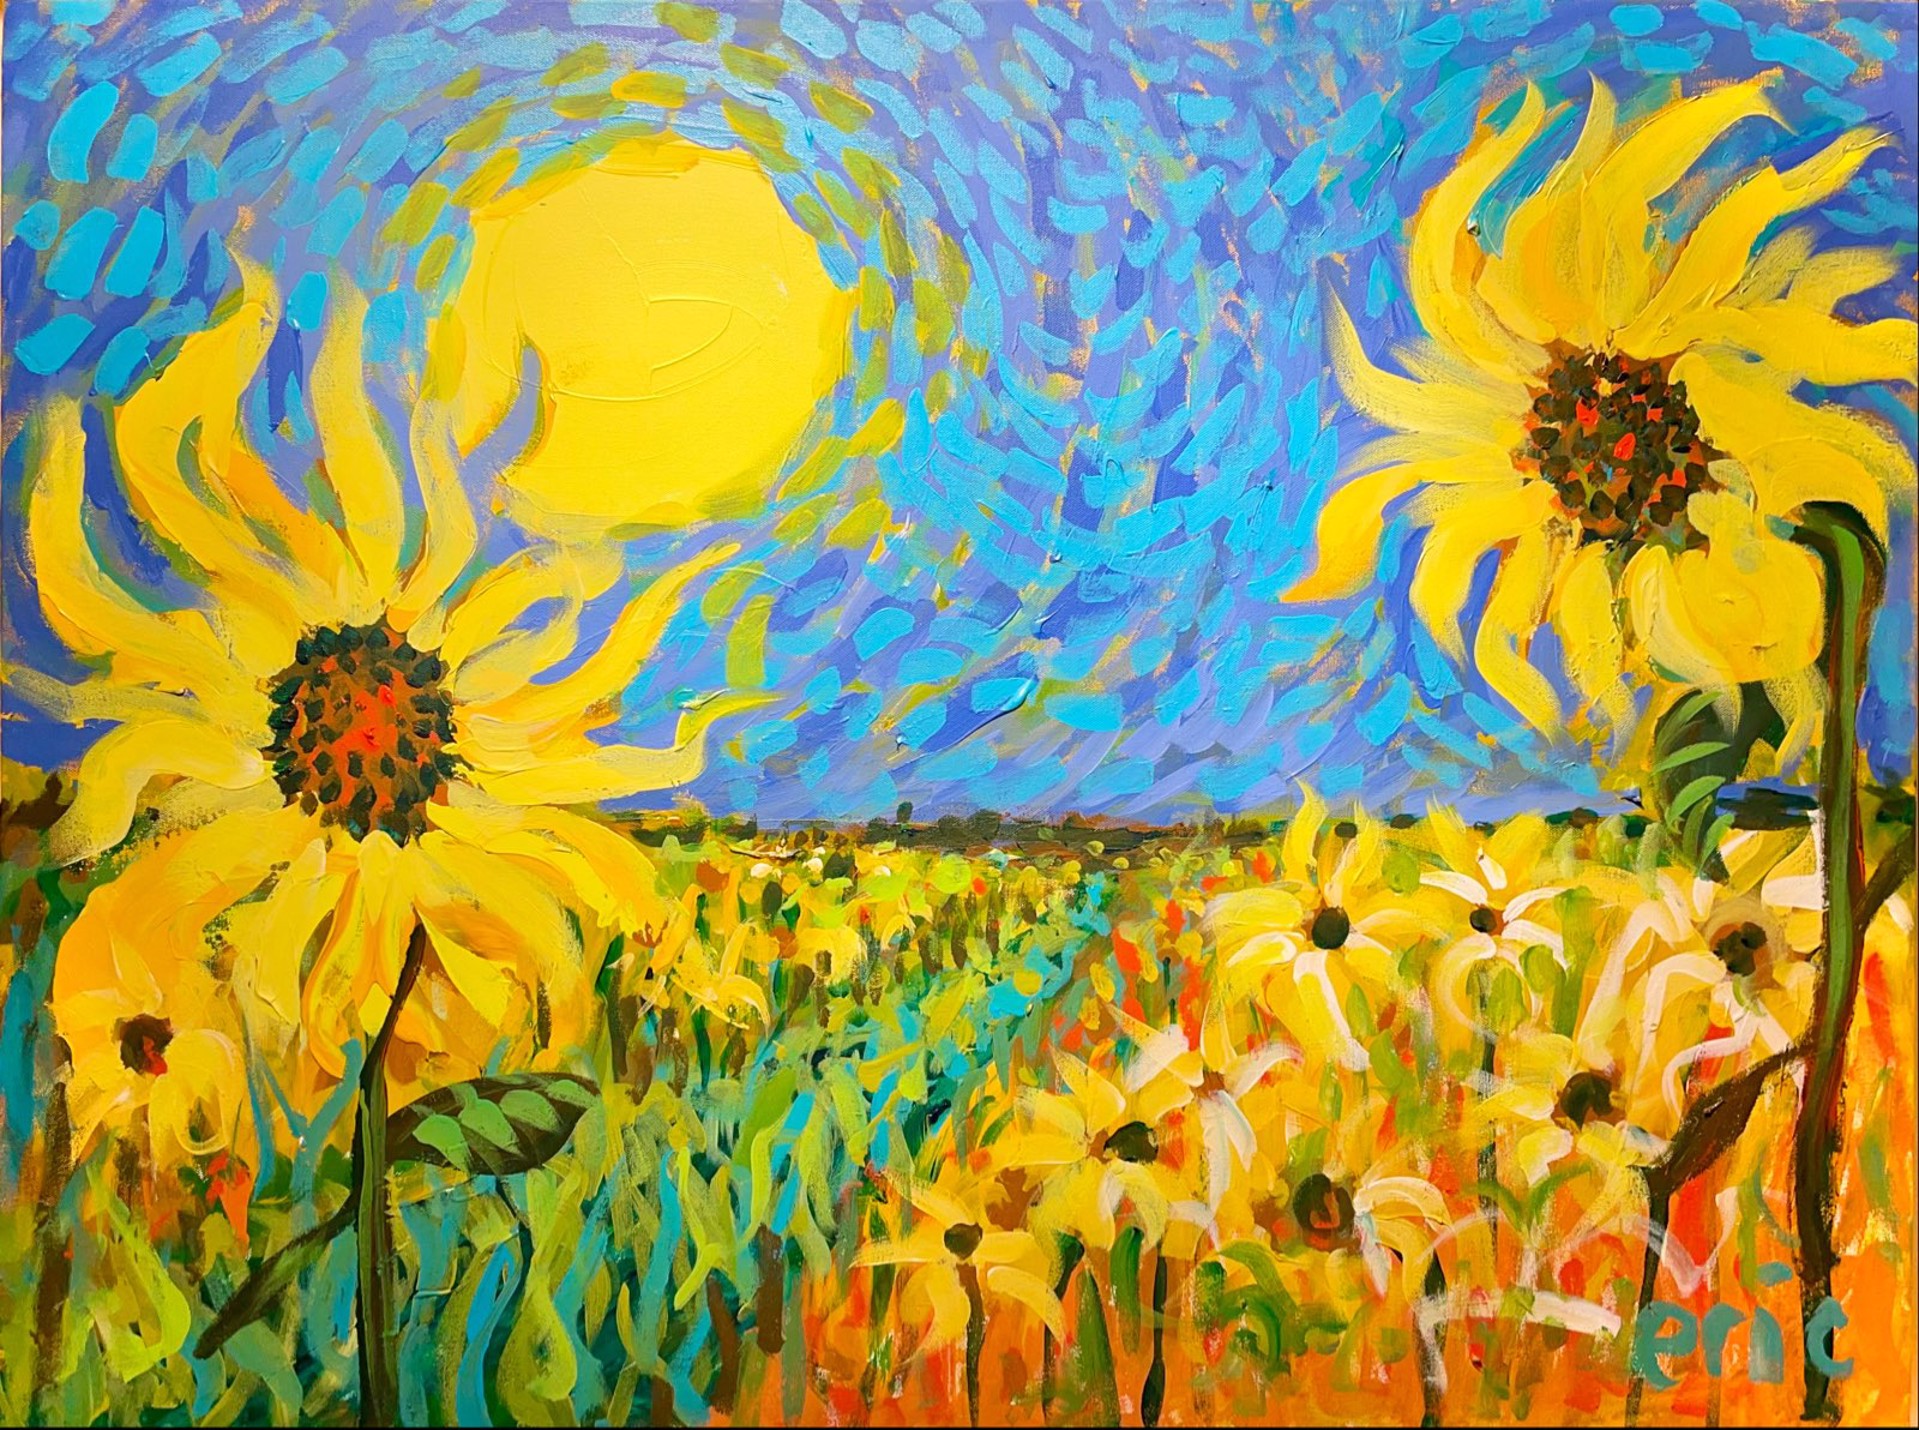 Talking Sunflowers by Eric Robison